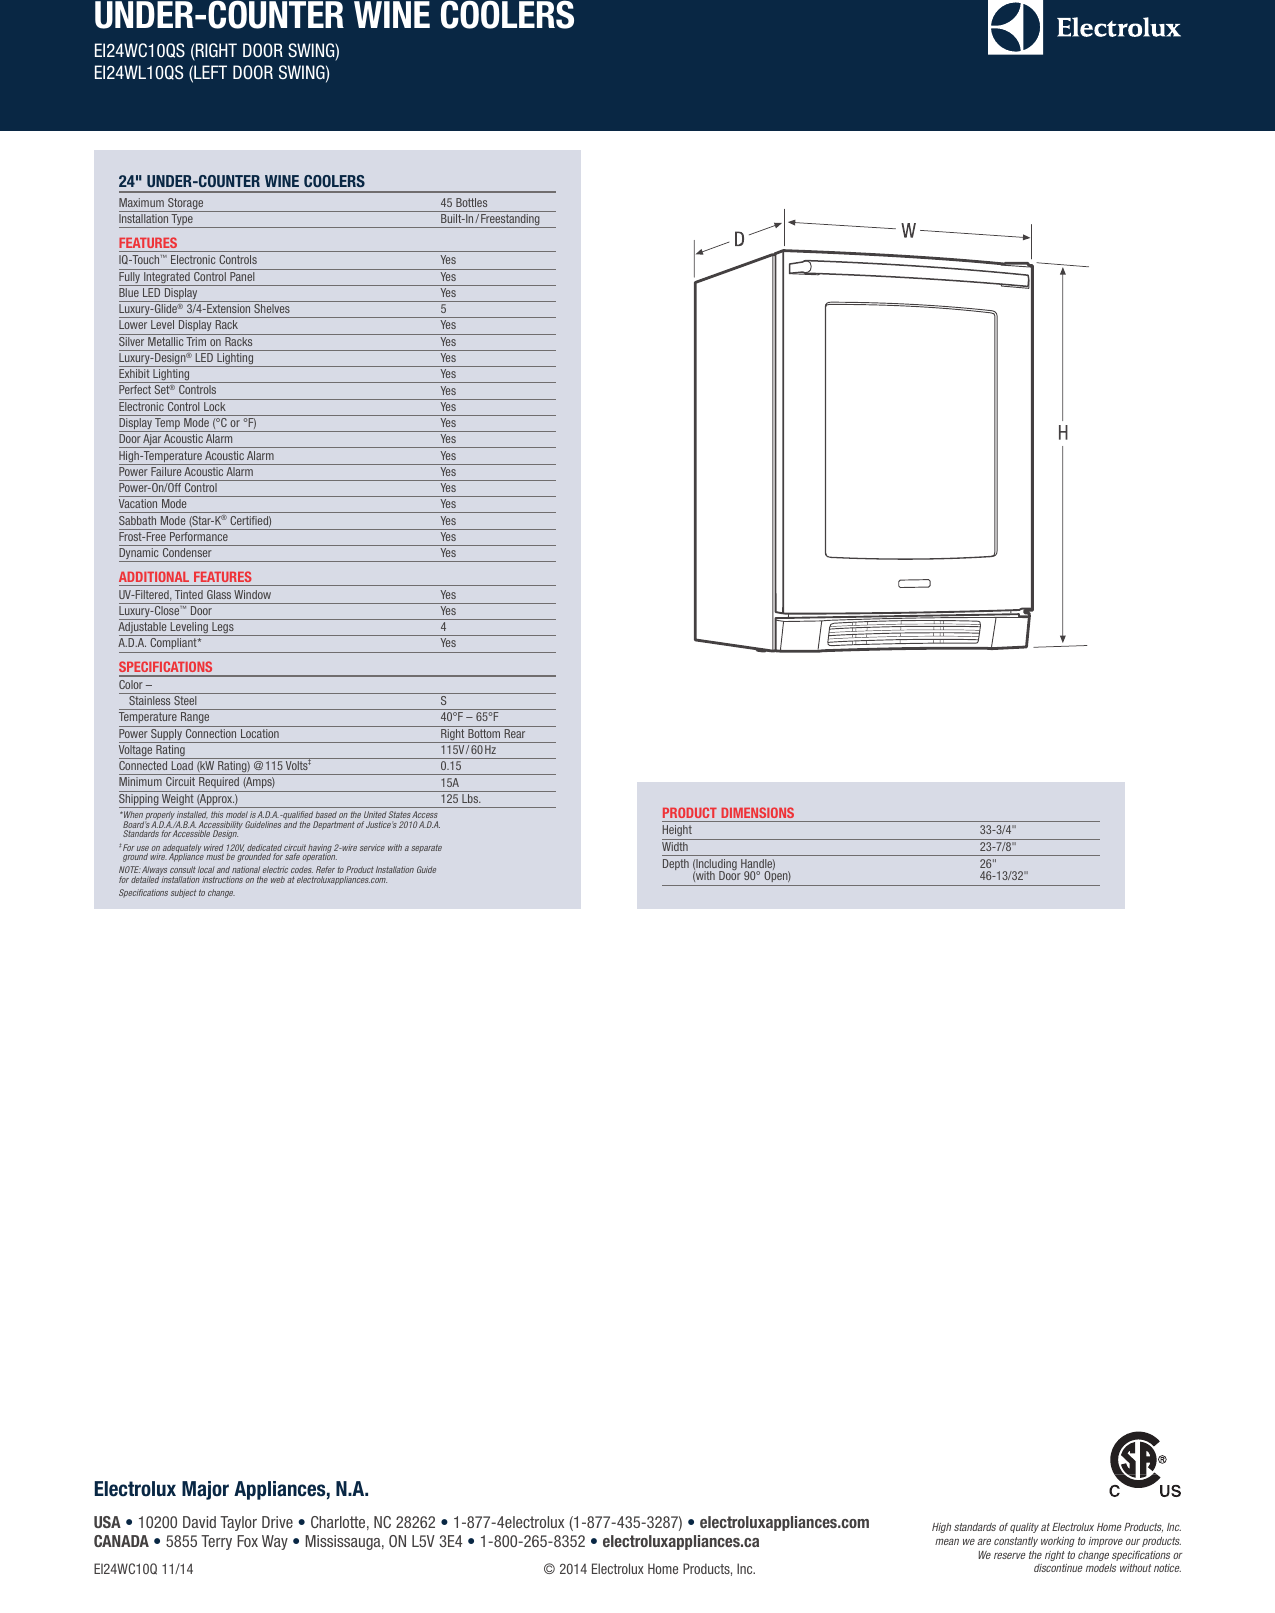 Page 2 of 6 - Electrolux Electrolux-24-Under-Counter-Wine-Cooler-With-Right-Door-Swing-Ei24Wc10Qs-Product-Specifications-Sheet-  Electrolux-24-under-counter-wine-cooler-with-right-door-swing-ei24wc10qs-product-specifications-sheet